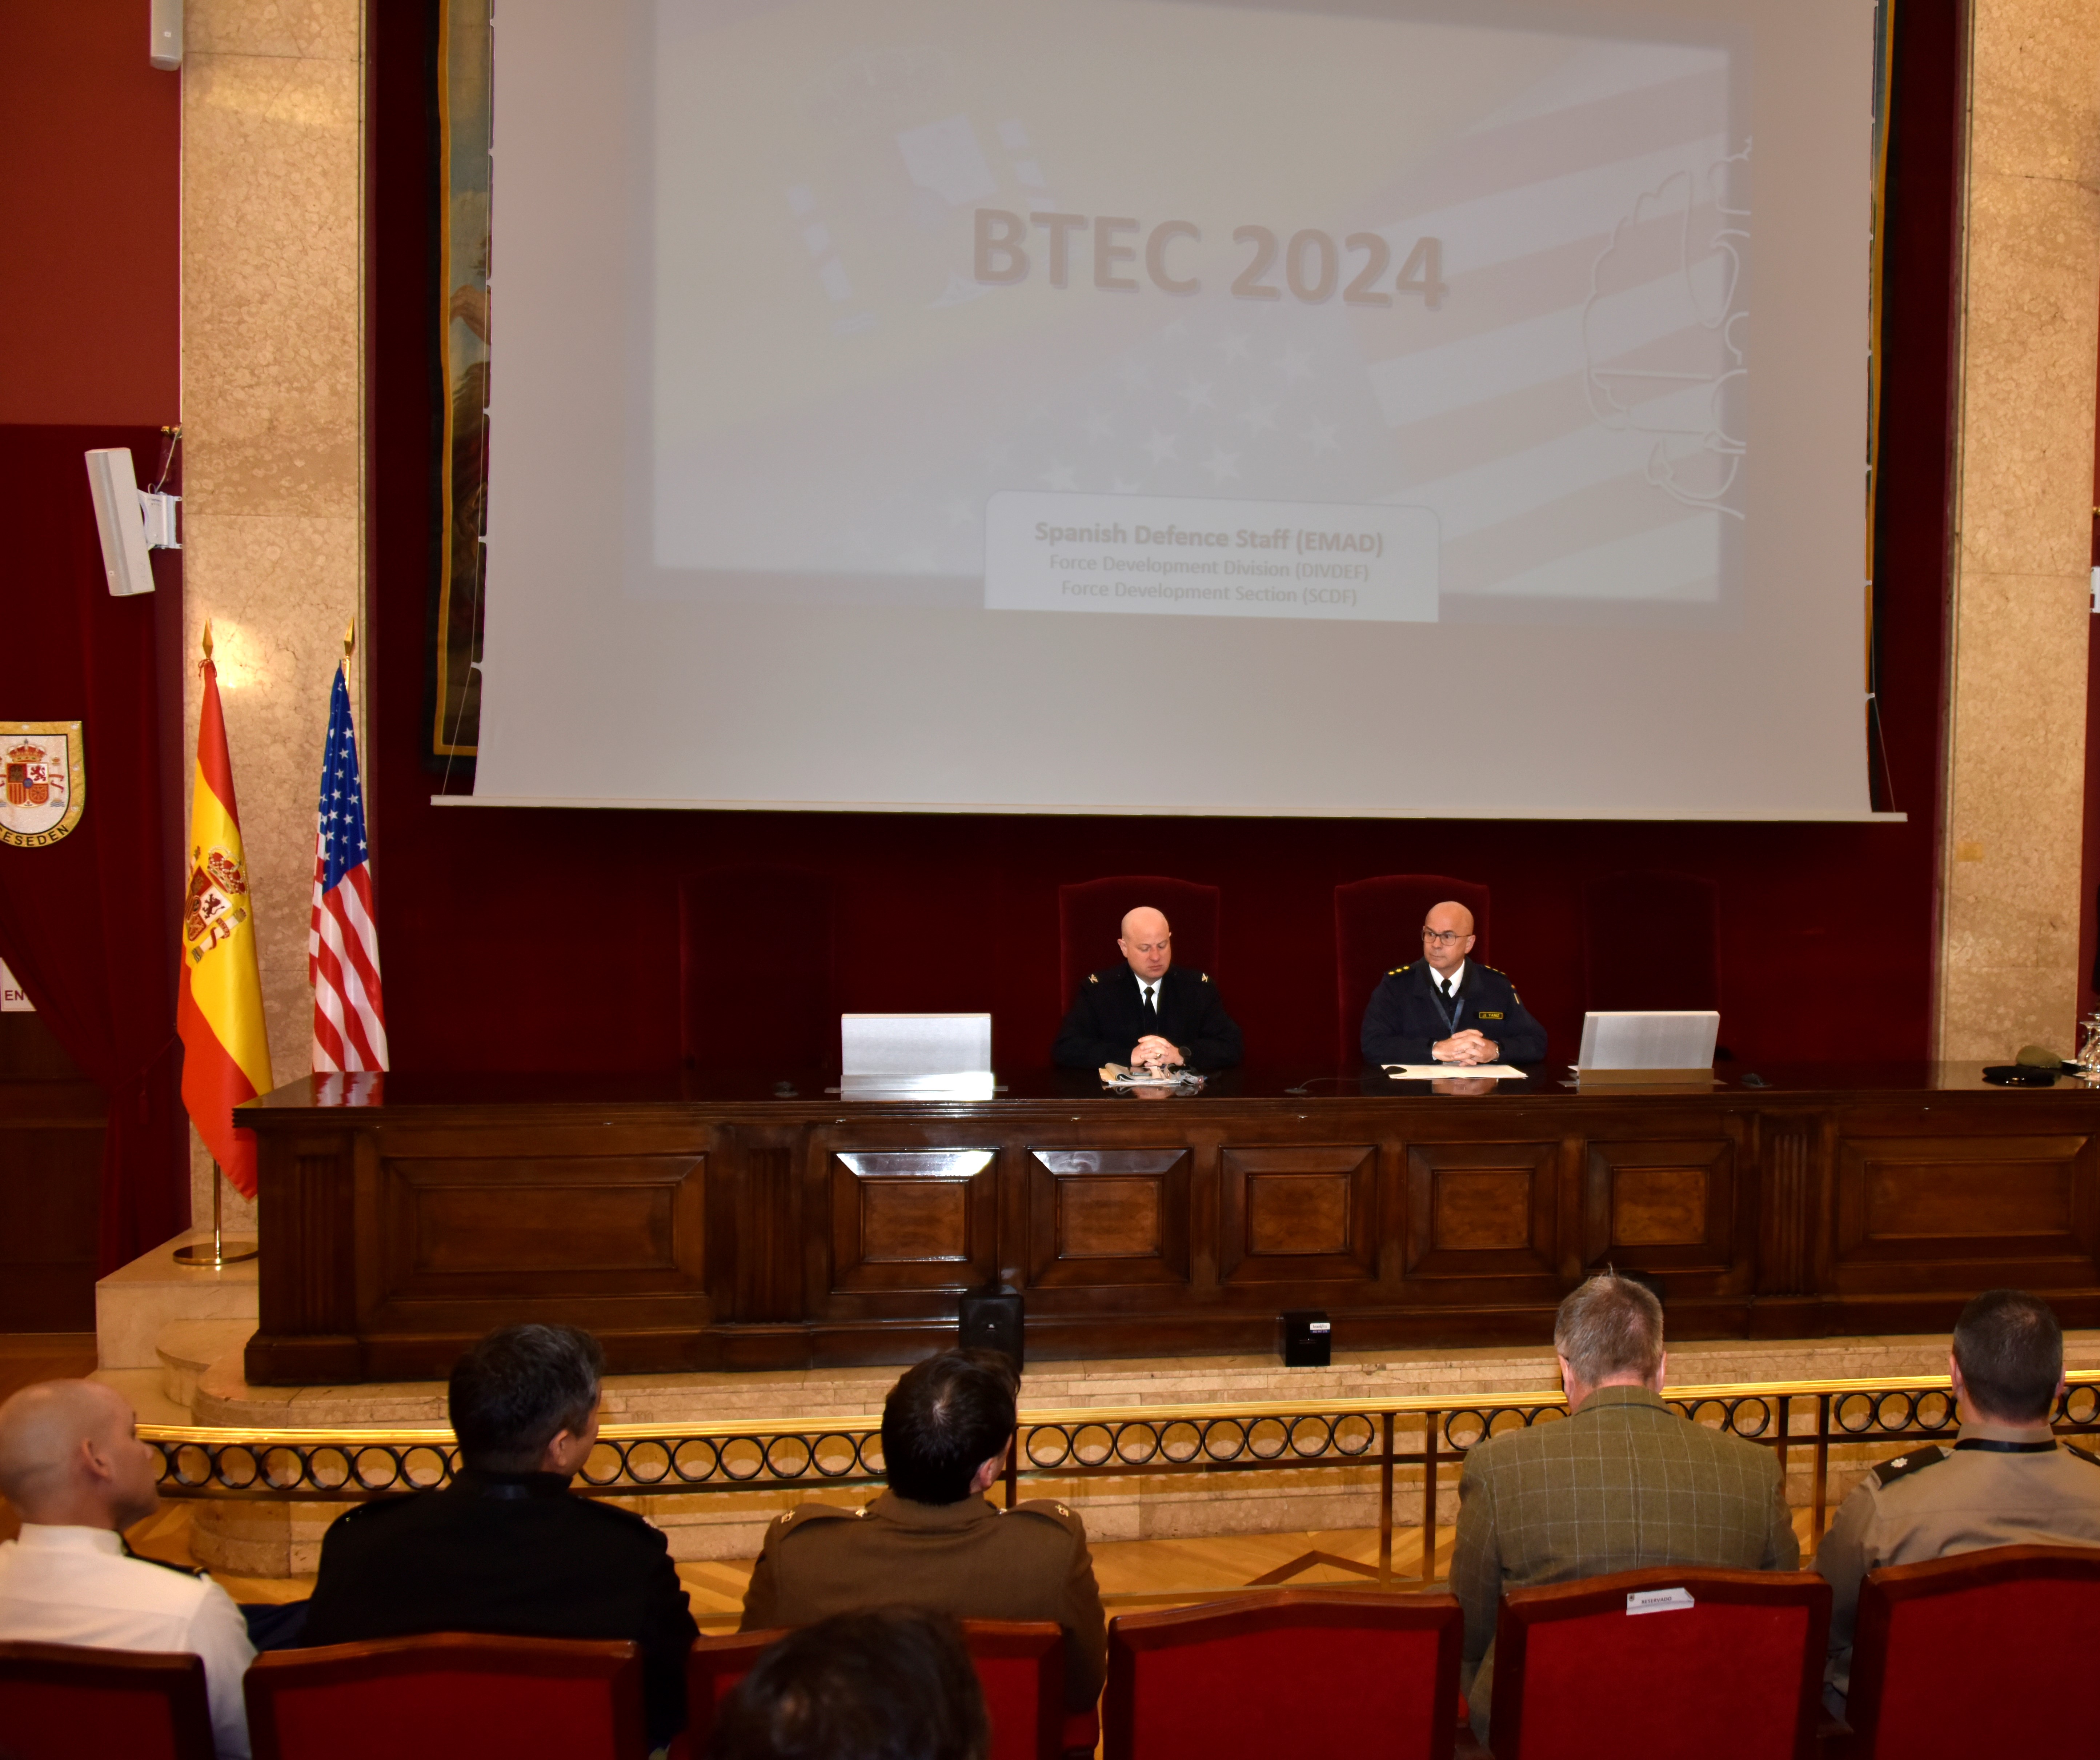 BTEC-24 Opening Session